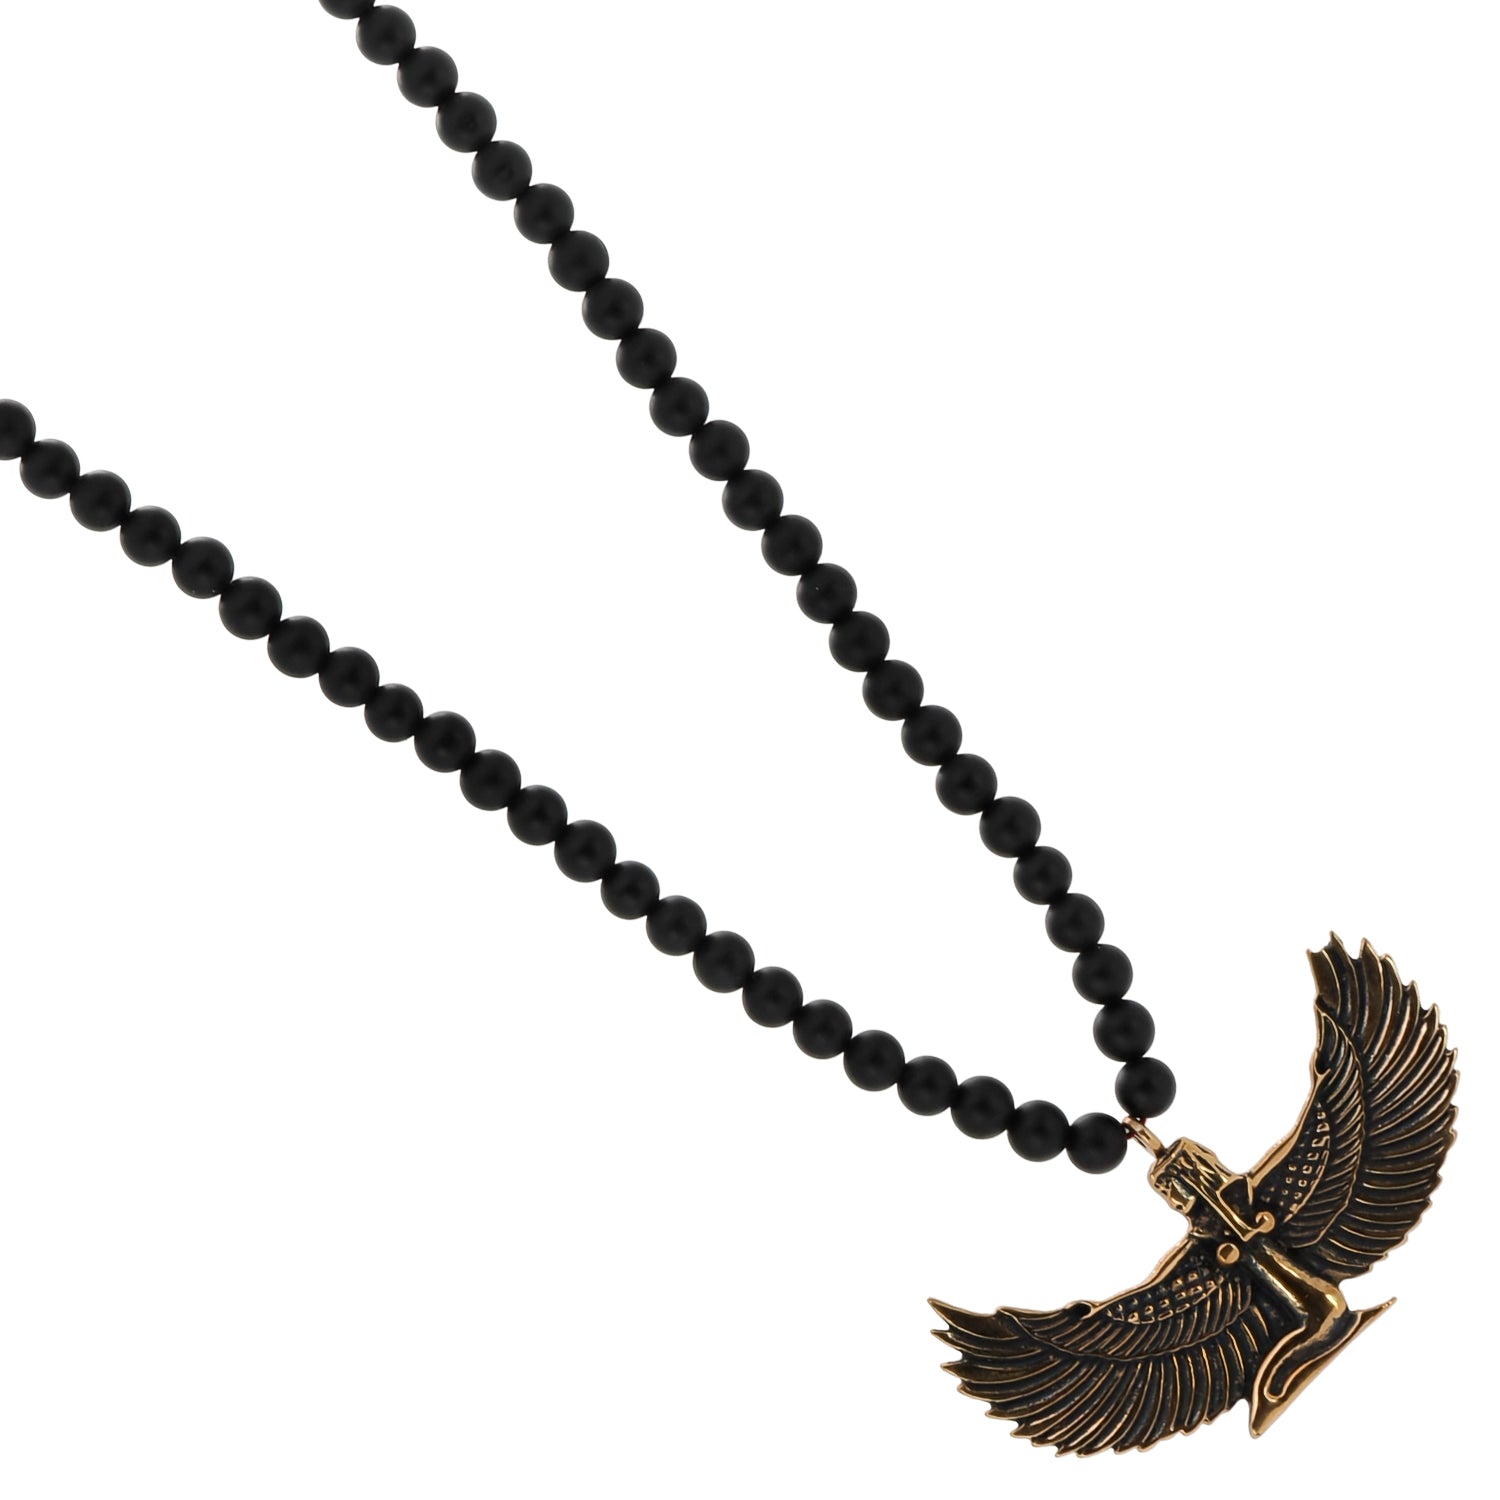 Spiritual Necklace with Isis Pendant and Black Onyx